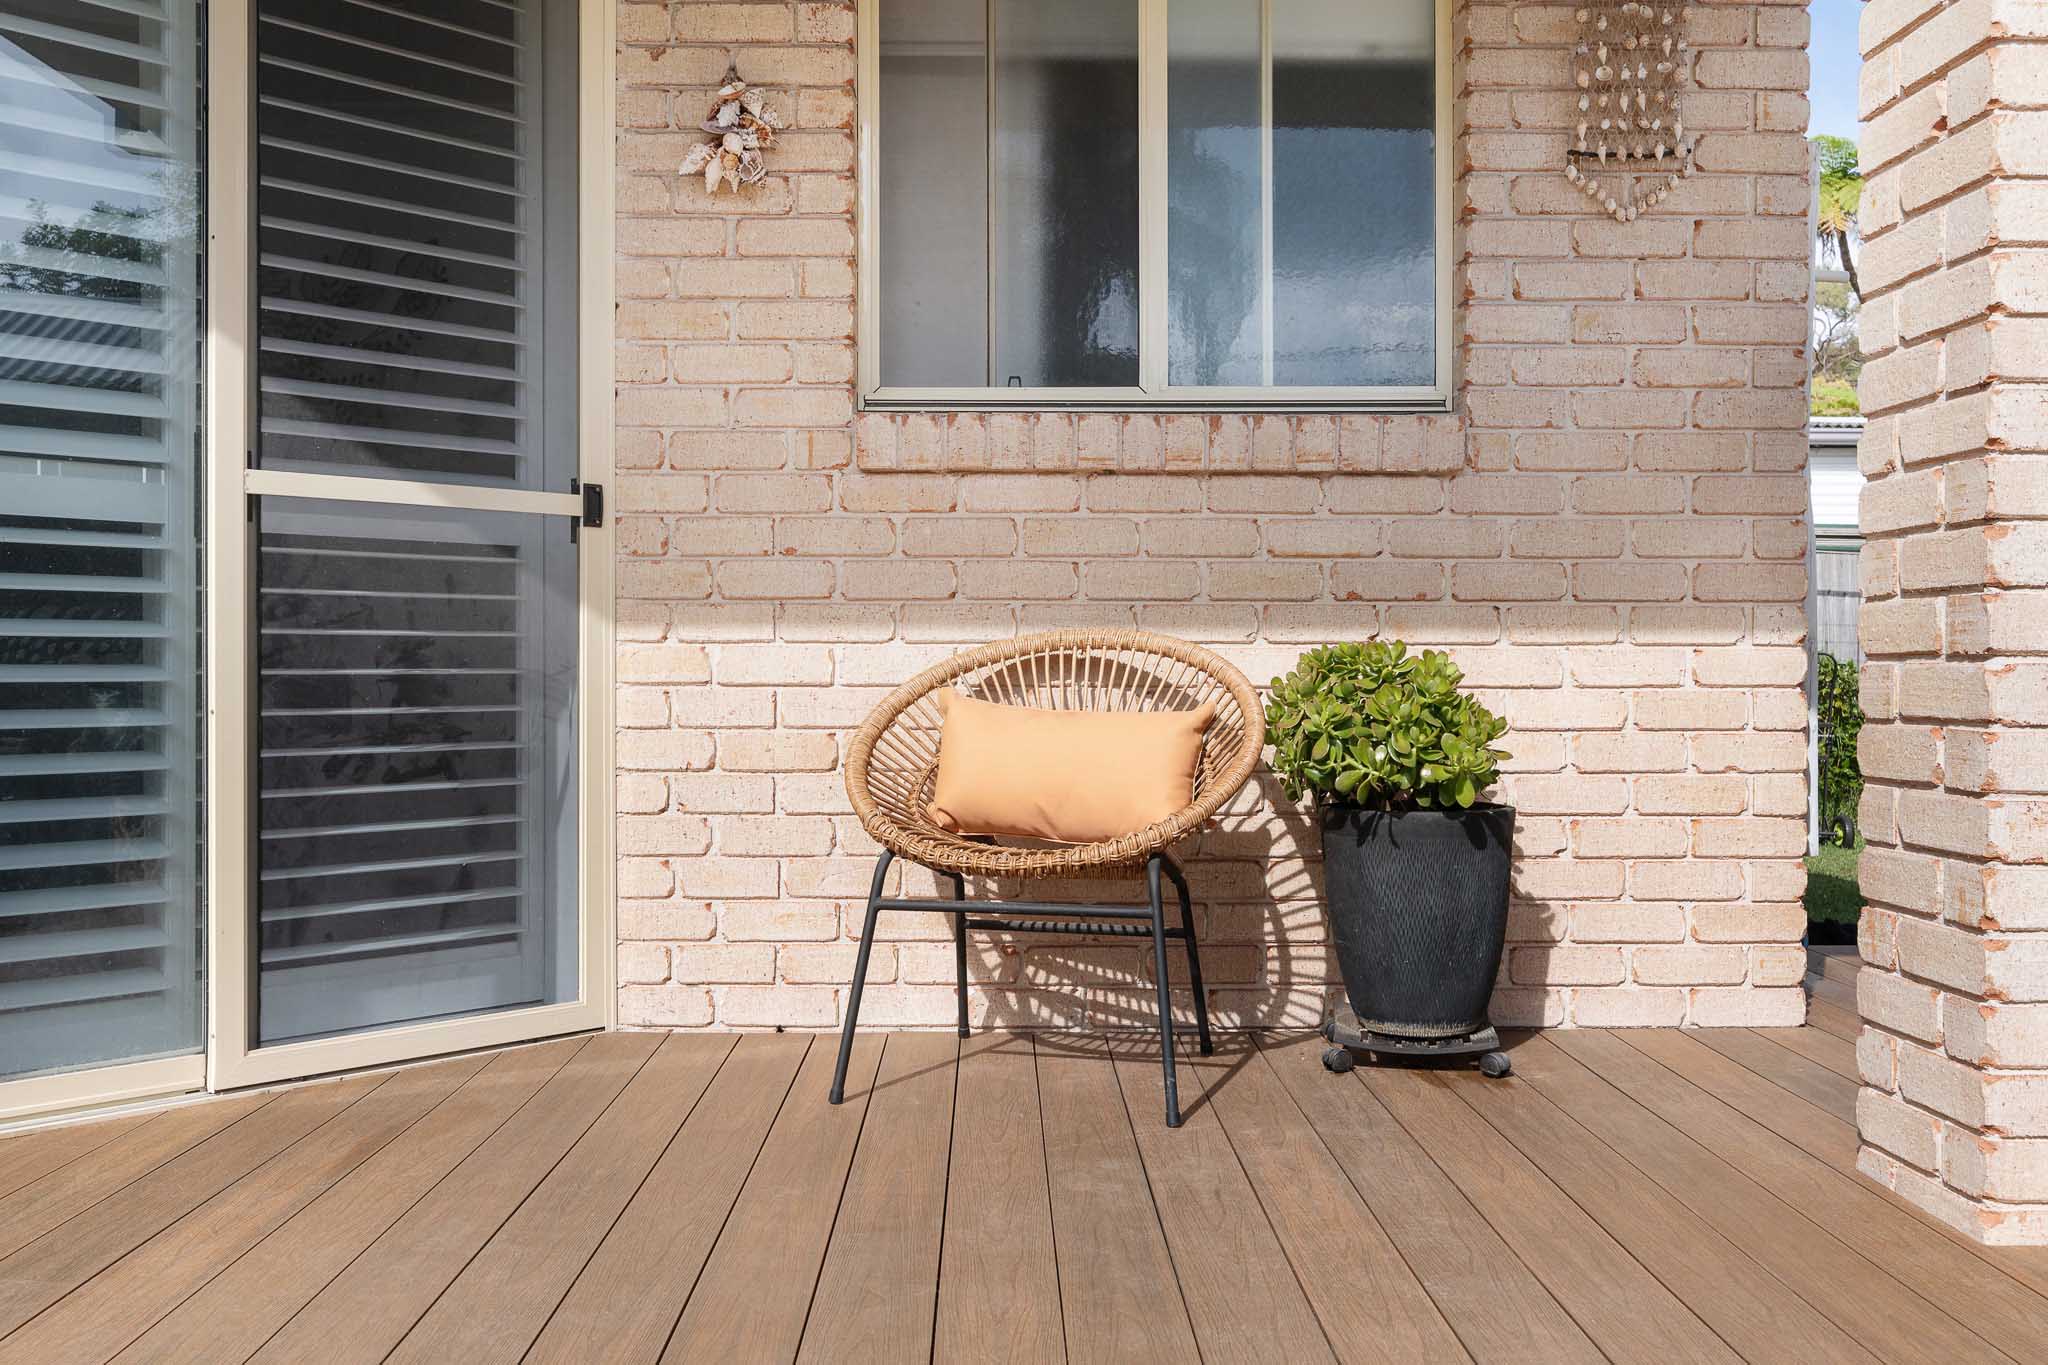 Teak composite decking boards with a cane chair on top